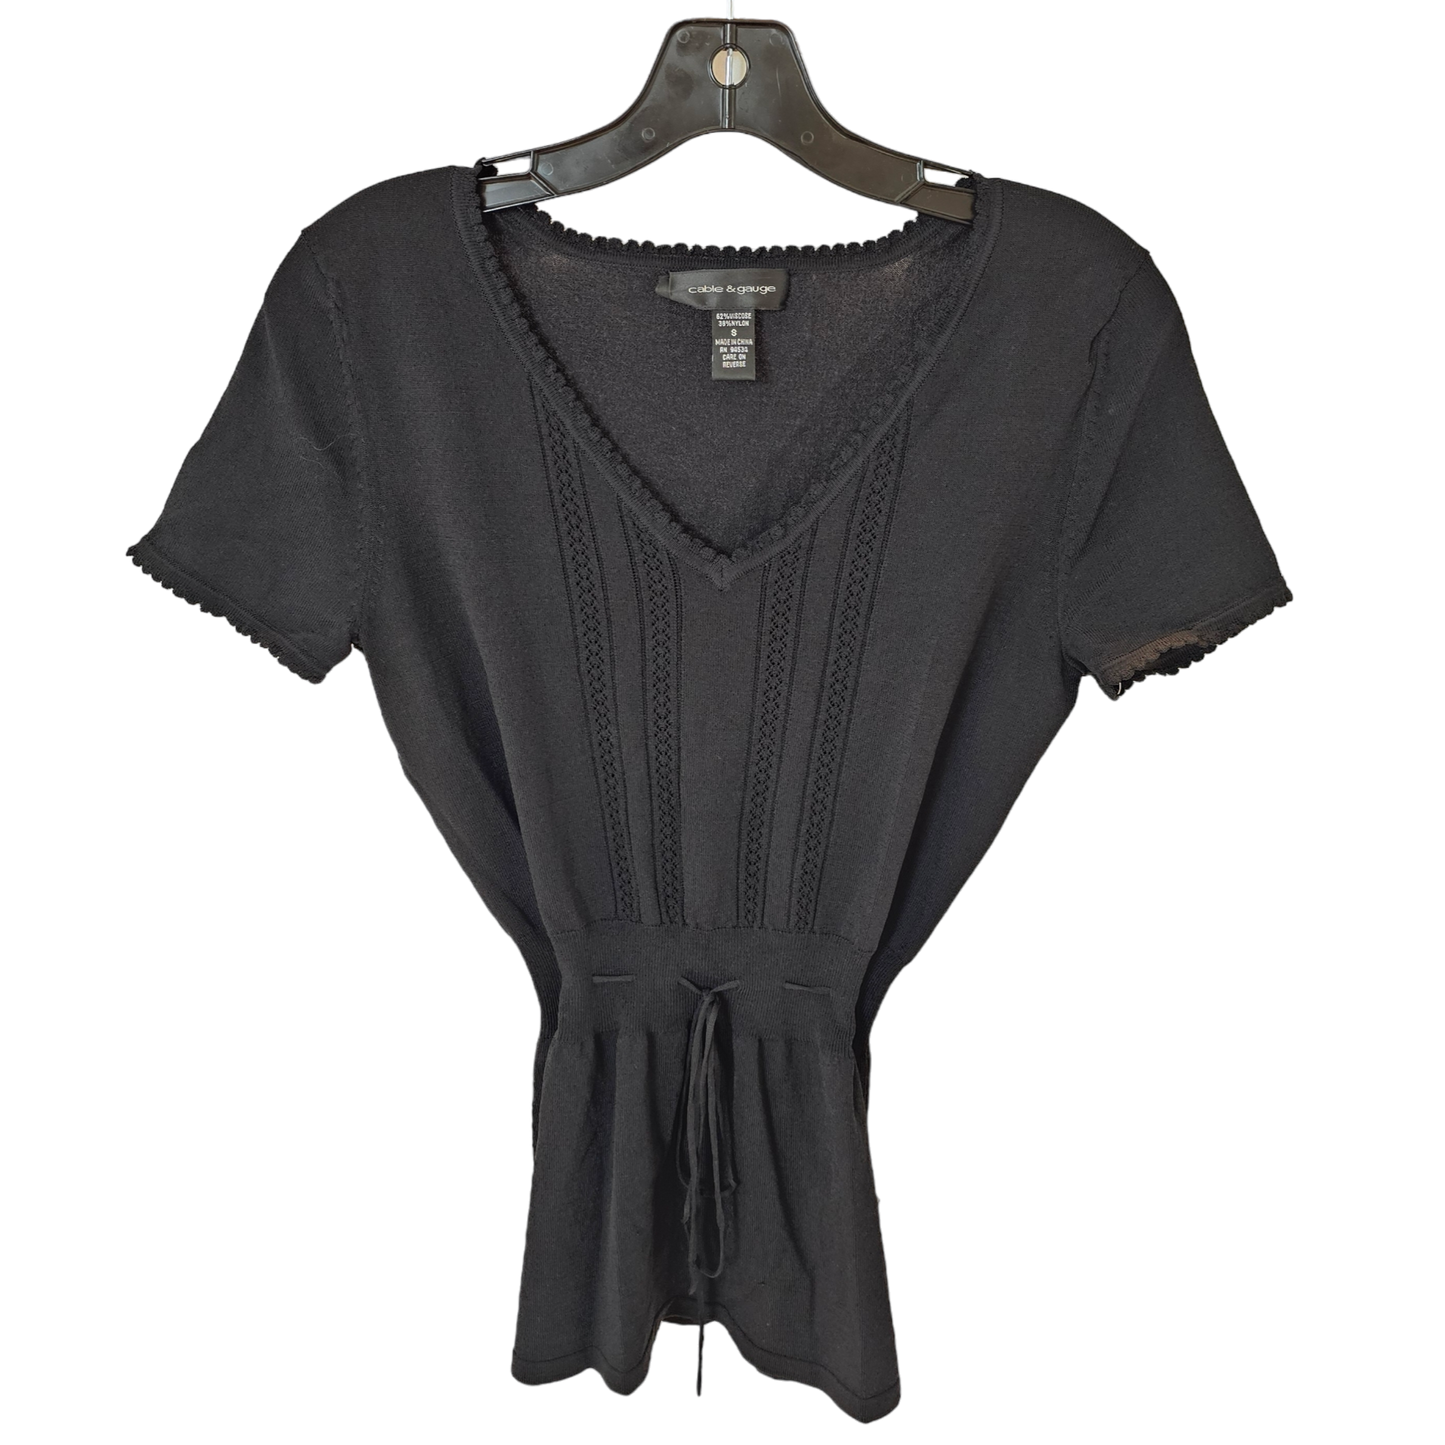 Top Short Sleeve By Cable And Gauge  Size: S